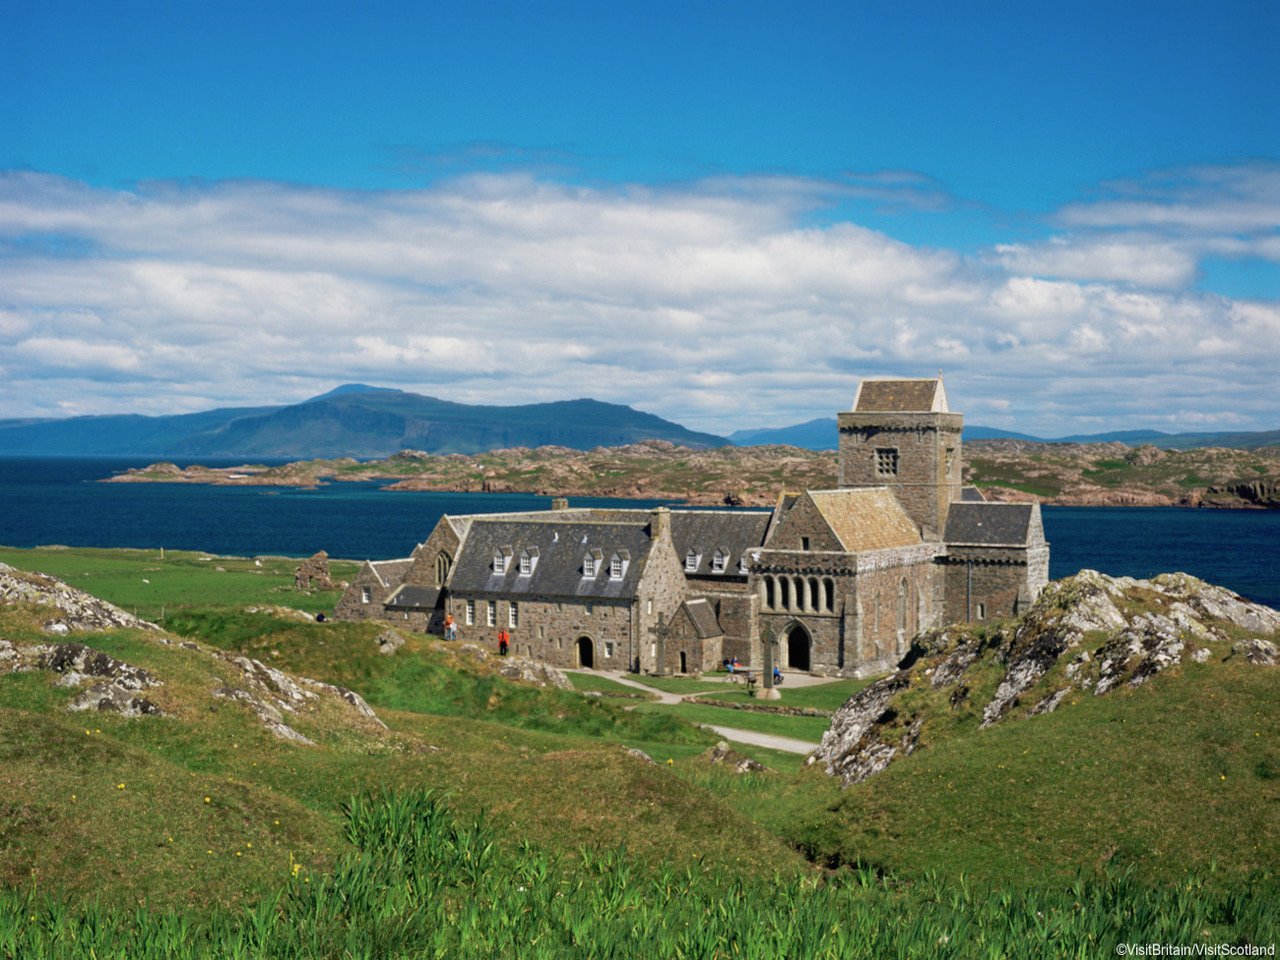 Iona Abbey is located on the Isle of Iona. The abbey was a focal point for the spread of Christianity throughout Scotland since Columba arrived there in AD 563.